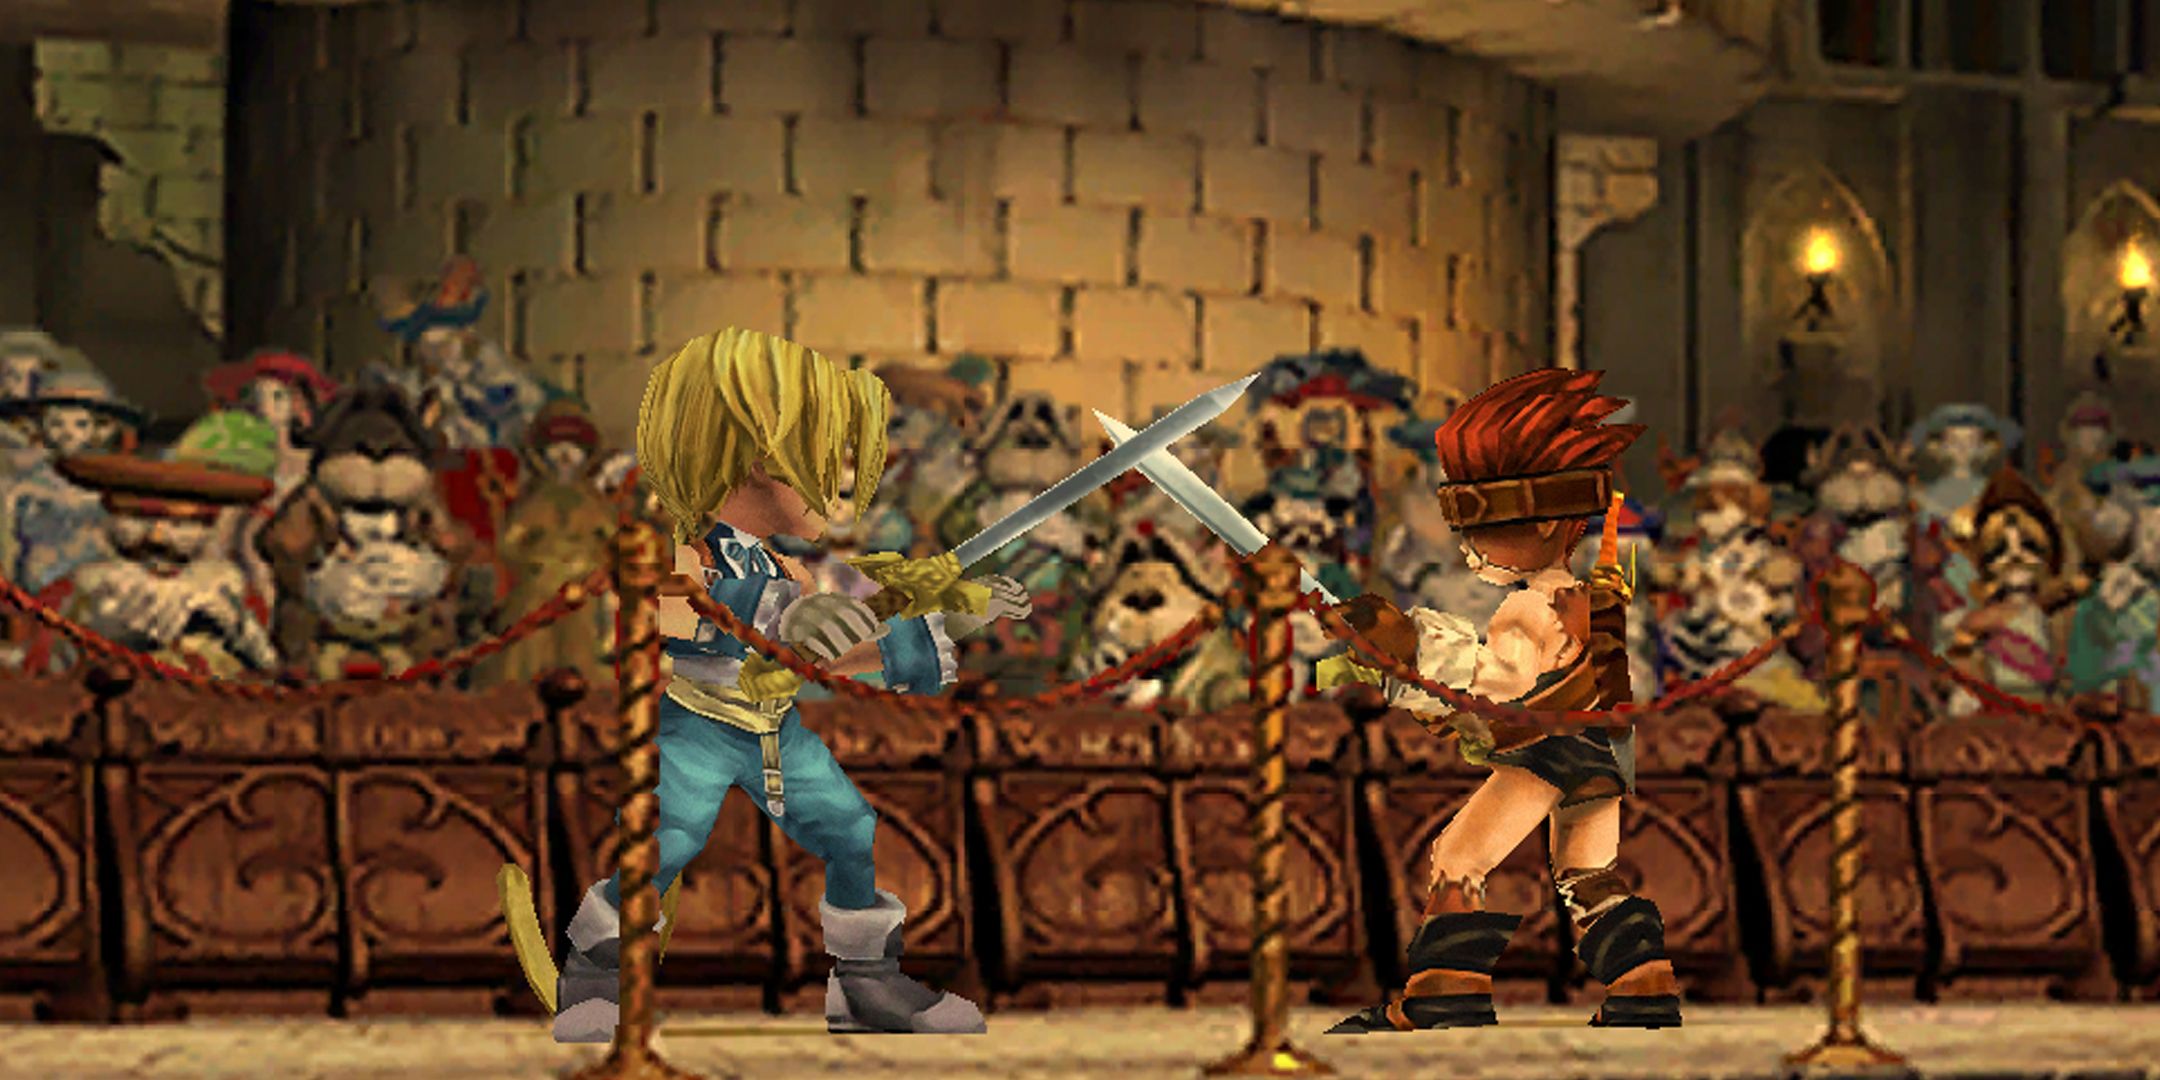 Final Fantasy 9 characters fighting in an arena for a play